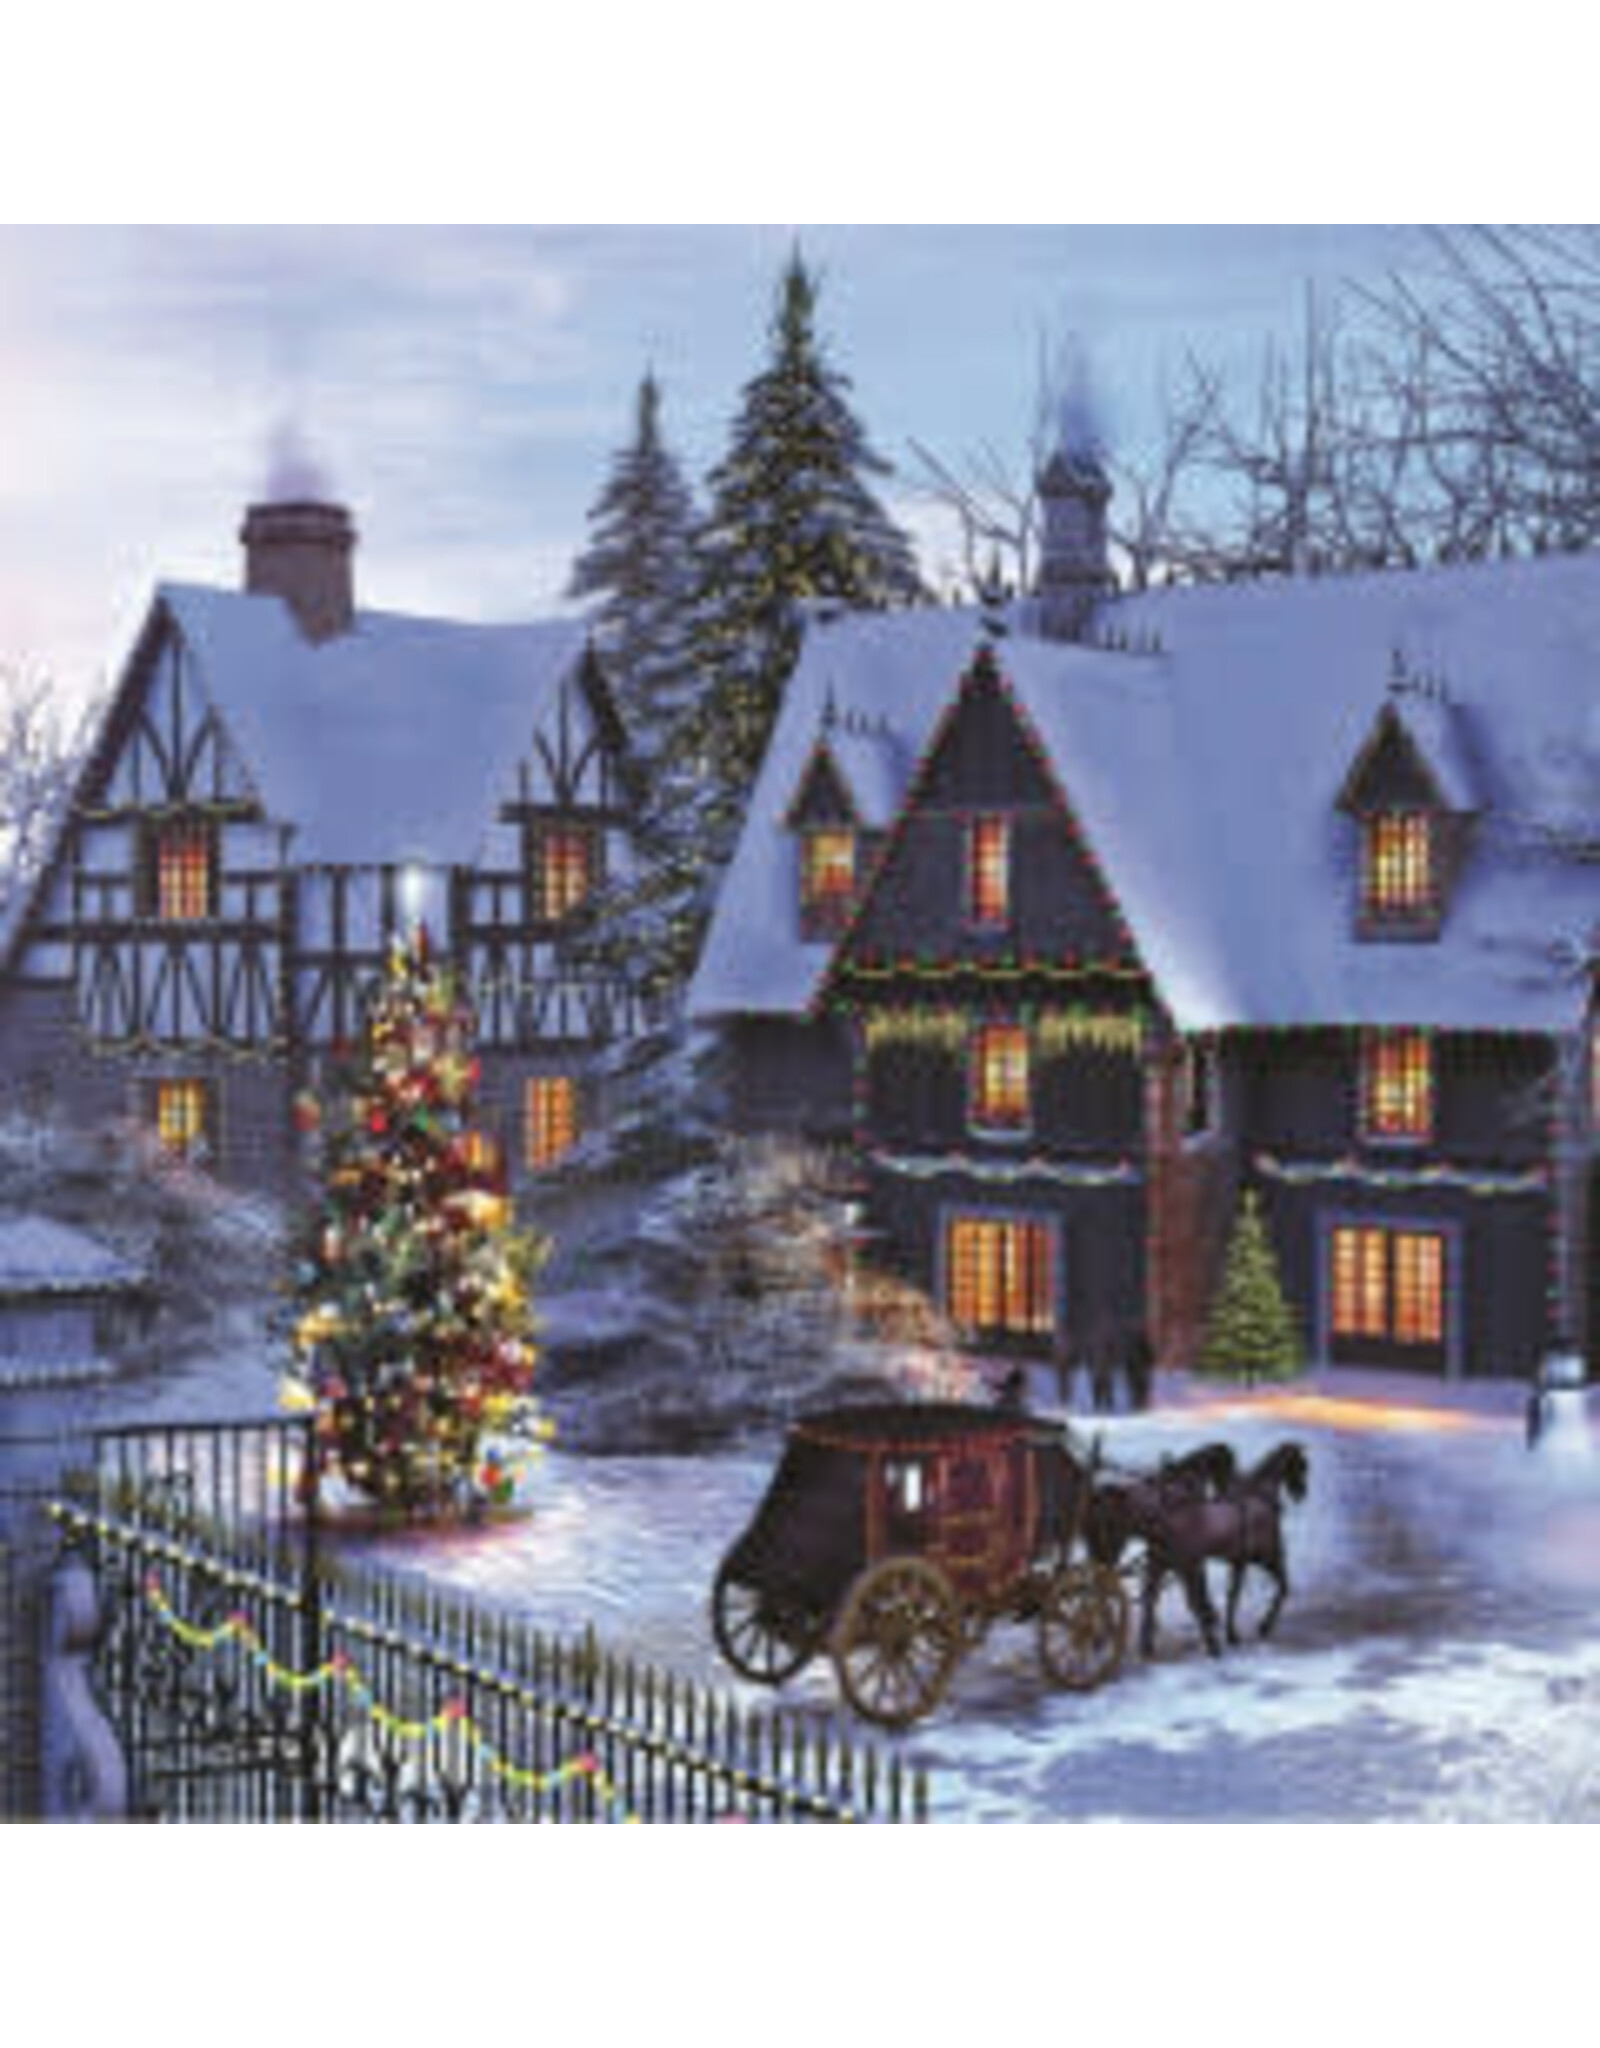 Home for Christmas 350 Piece Jigsaw Puzzle